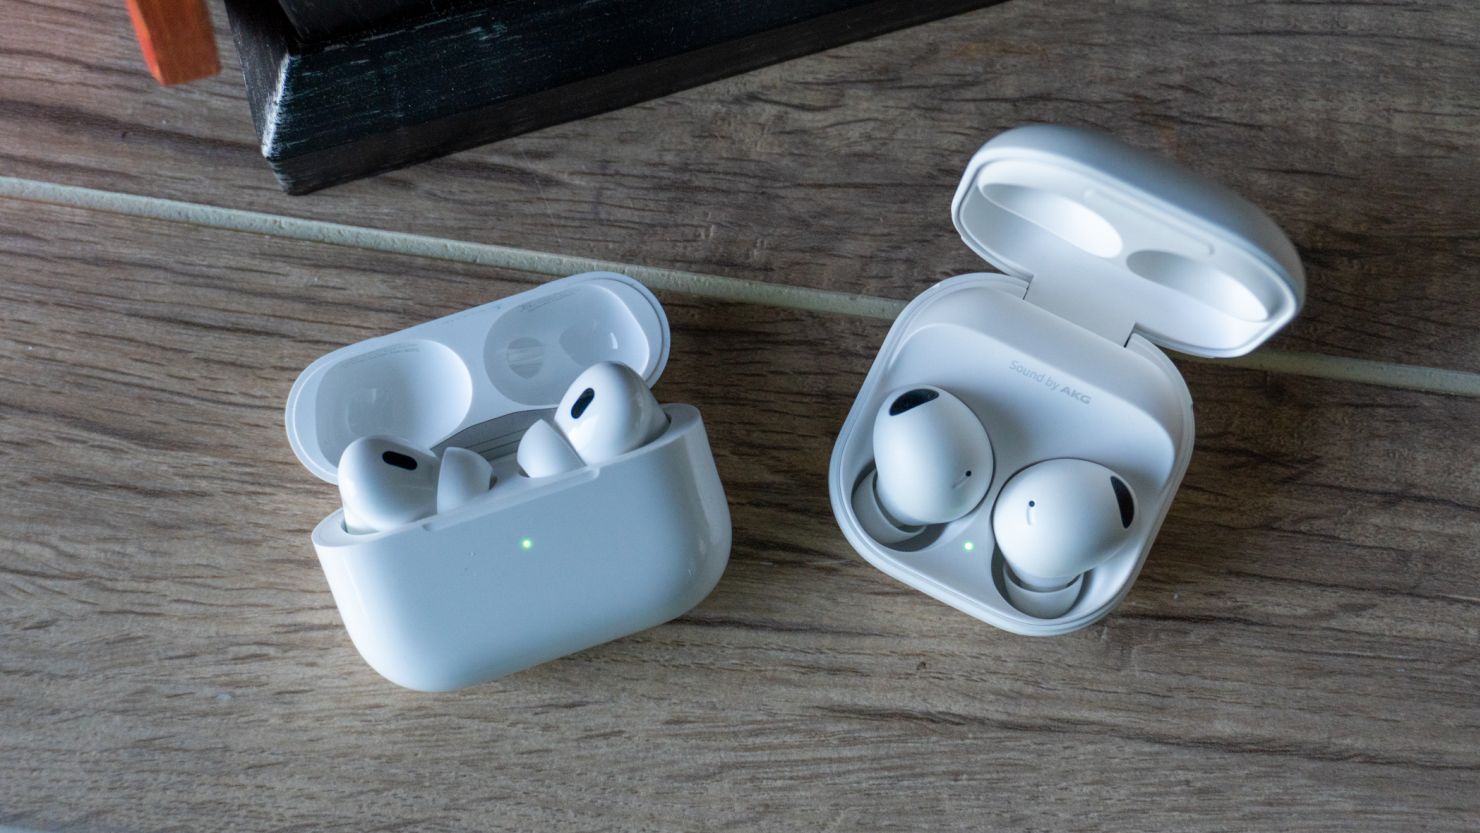 AirPods Pro 2 vs Galaxy Buds 2 Pro: Team Apple or team Samsung